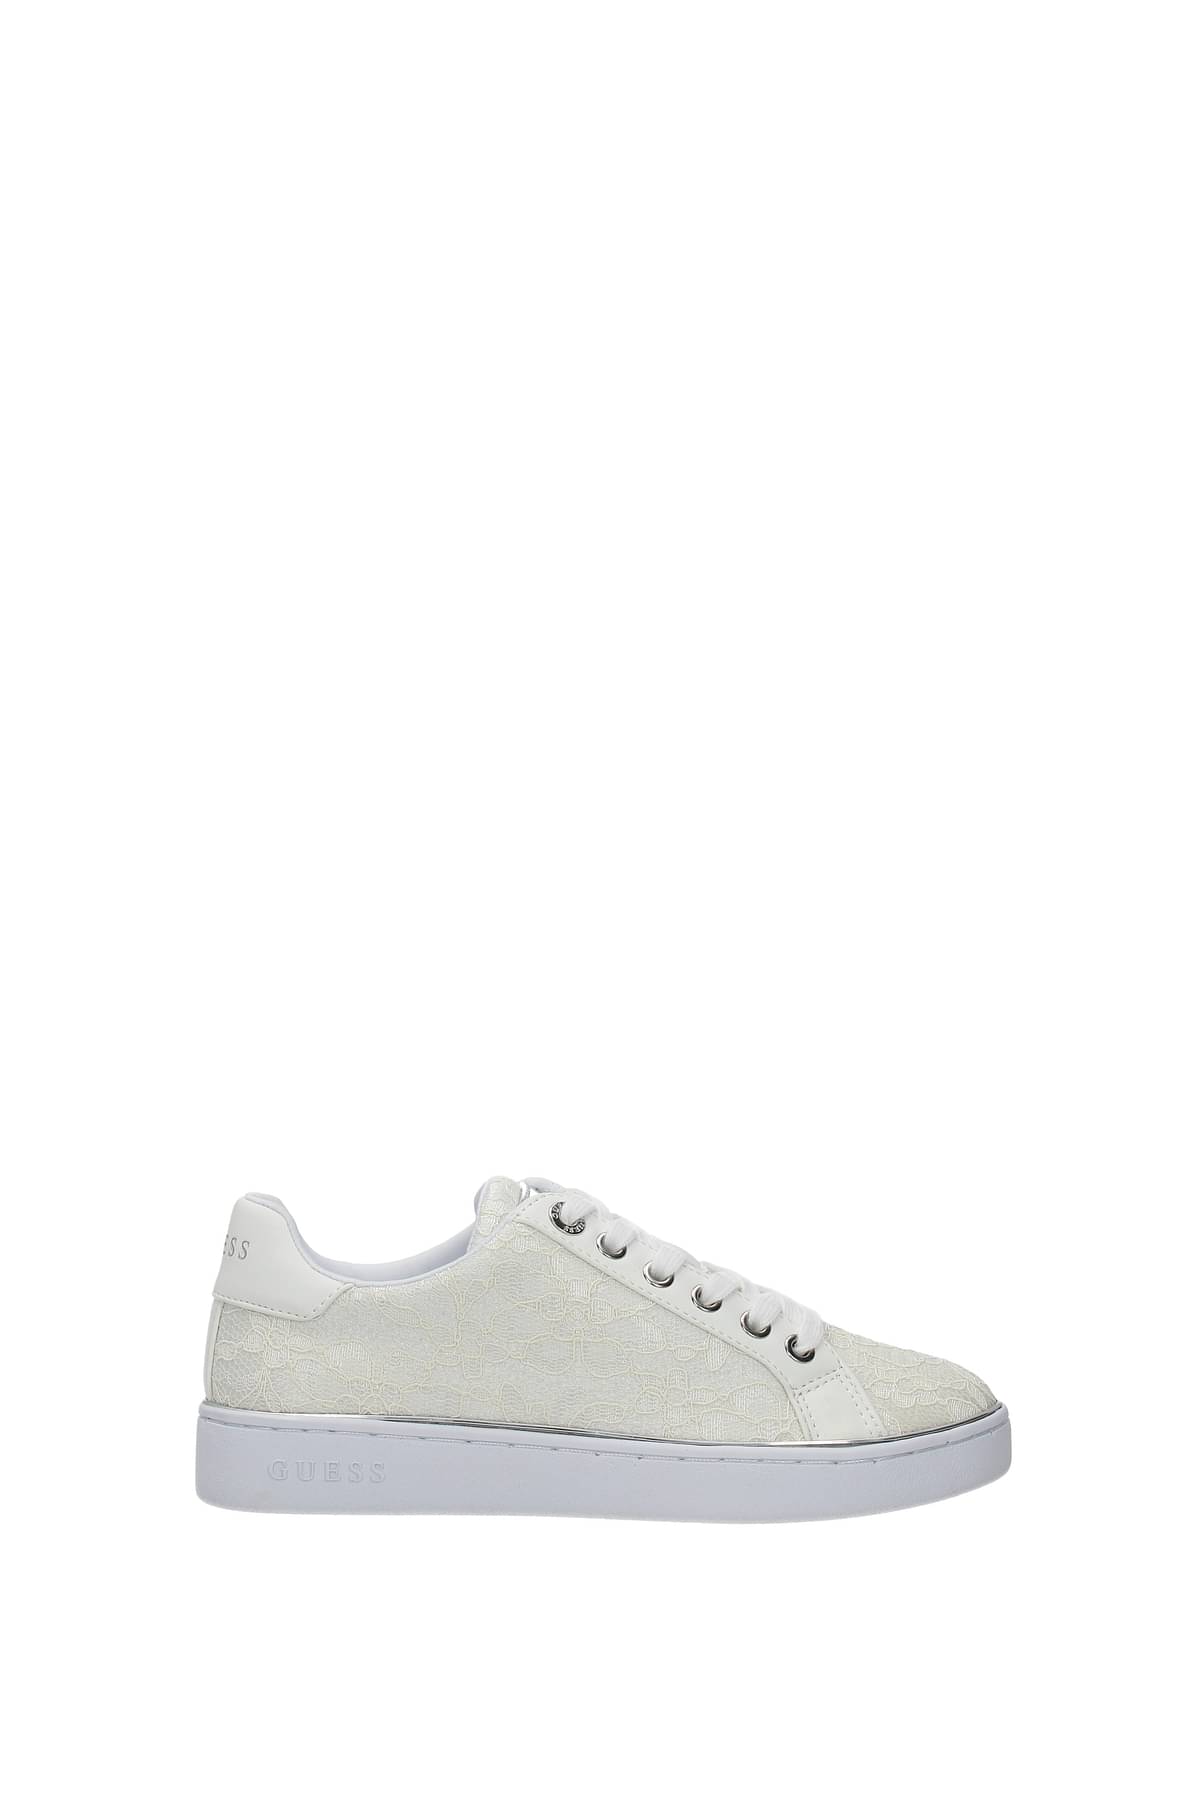 Sneakers Guess femme